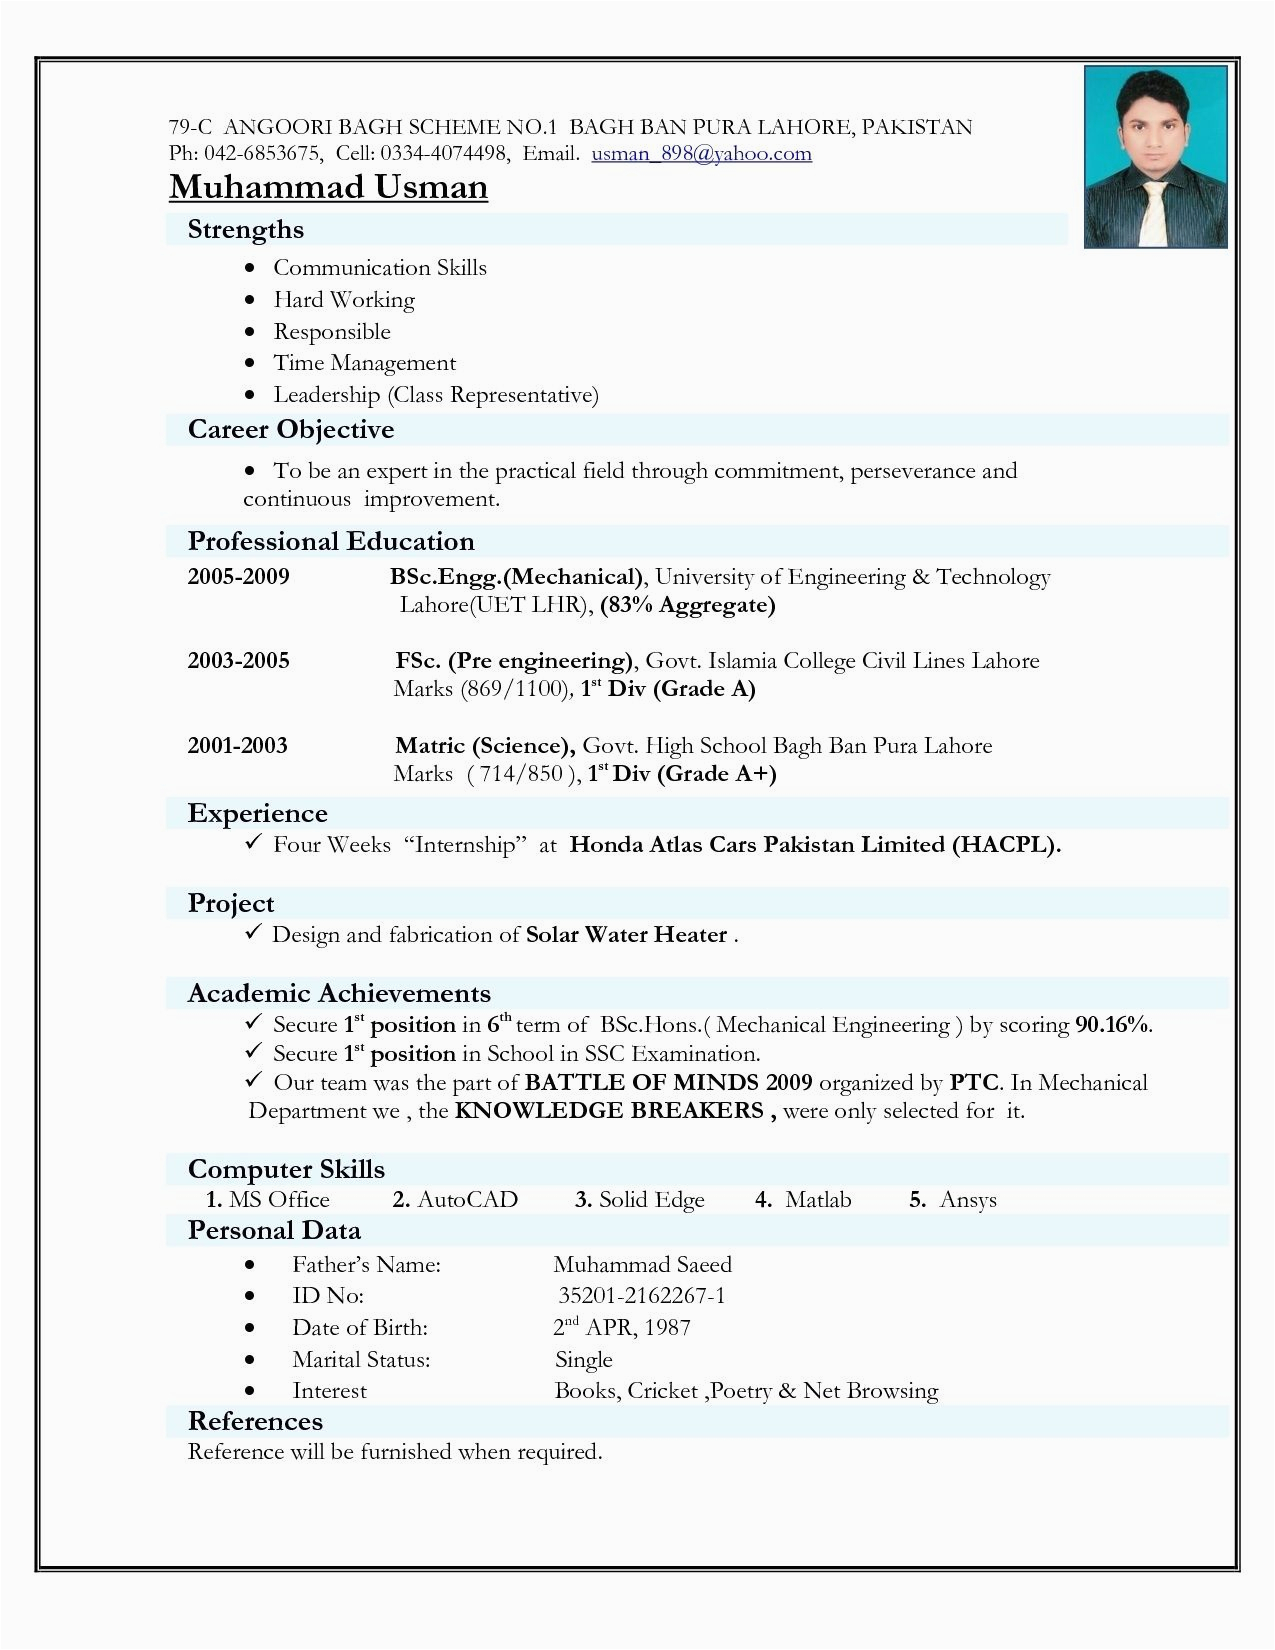 Sample Resume for Engineering Students India Resume format India